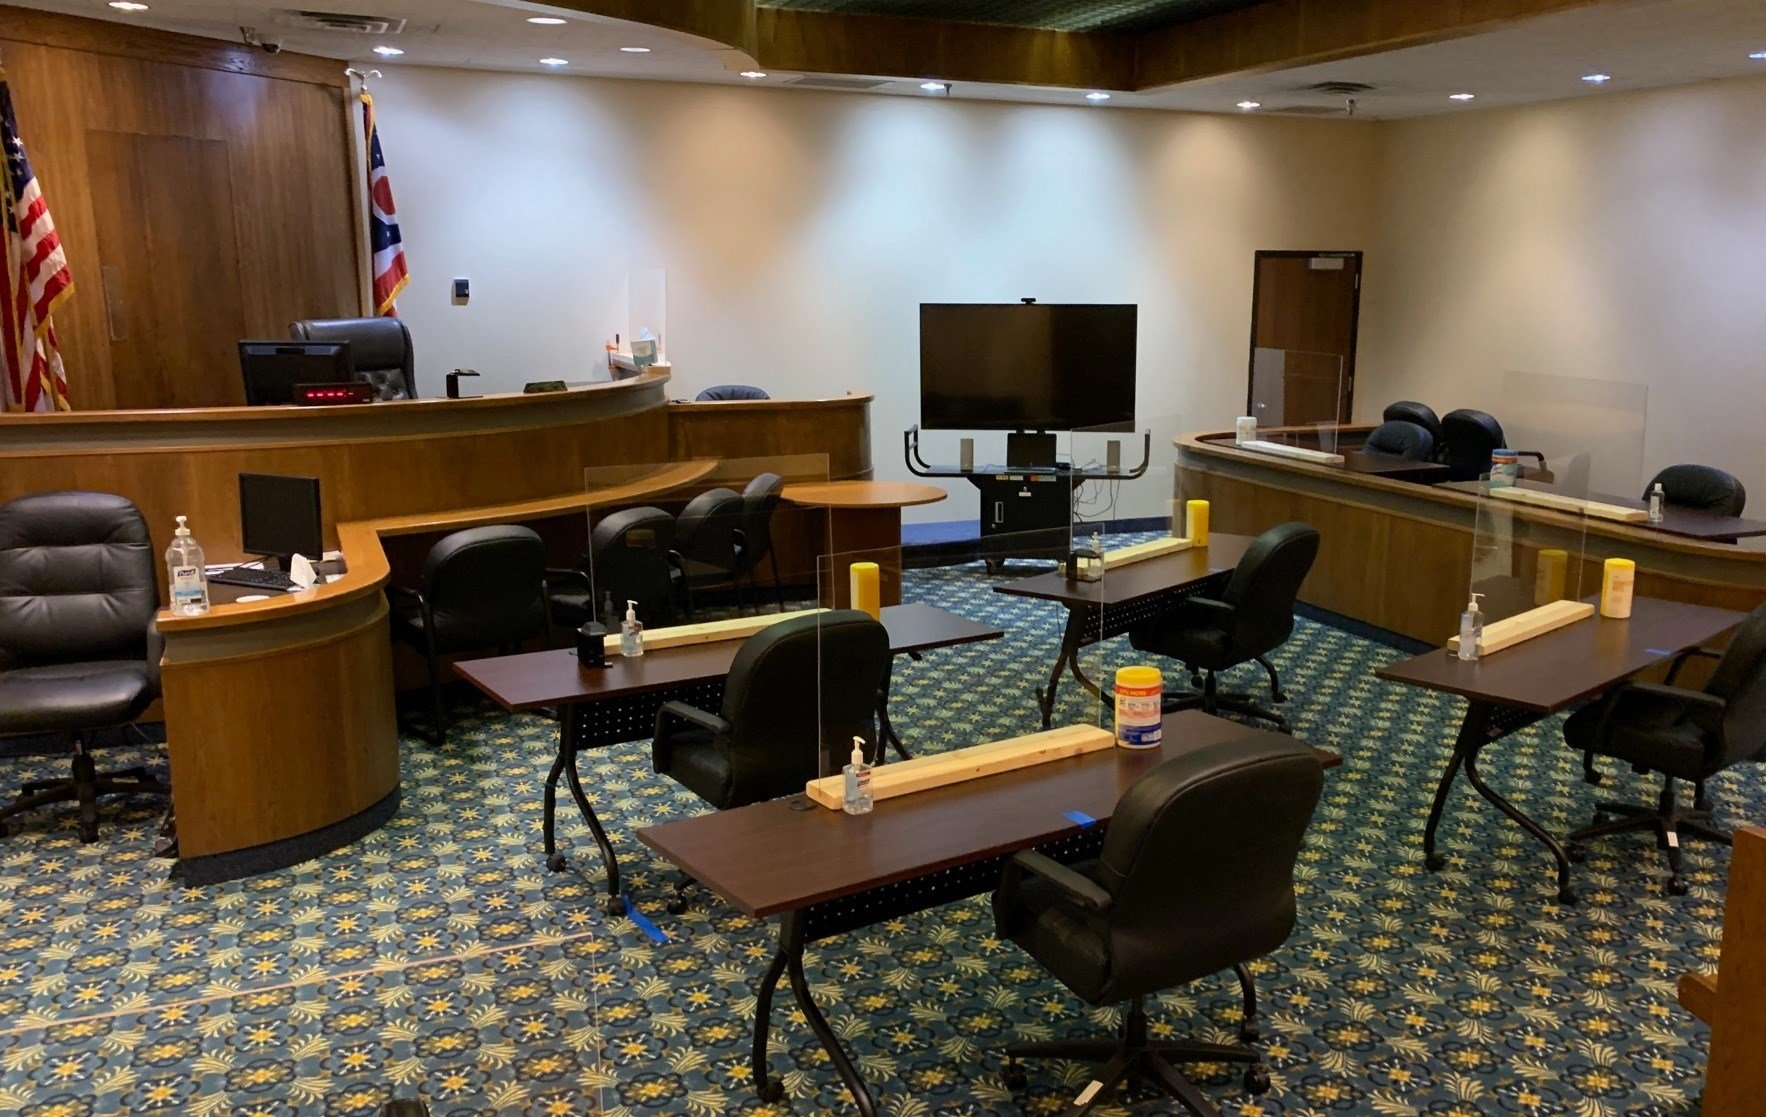 Trumbull Co Family Court set to reopen to public WFMJ com